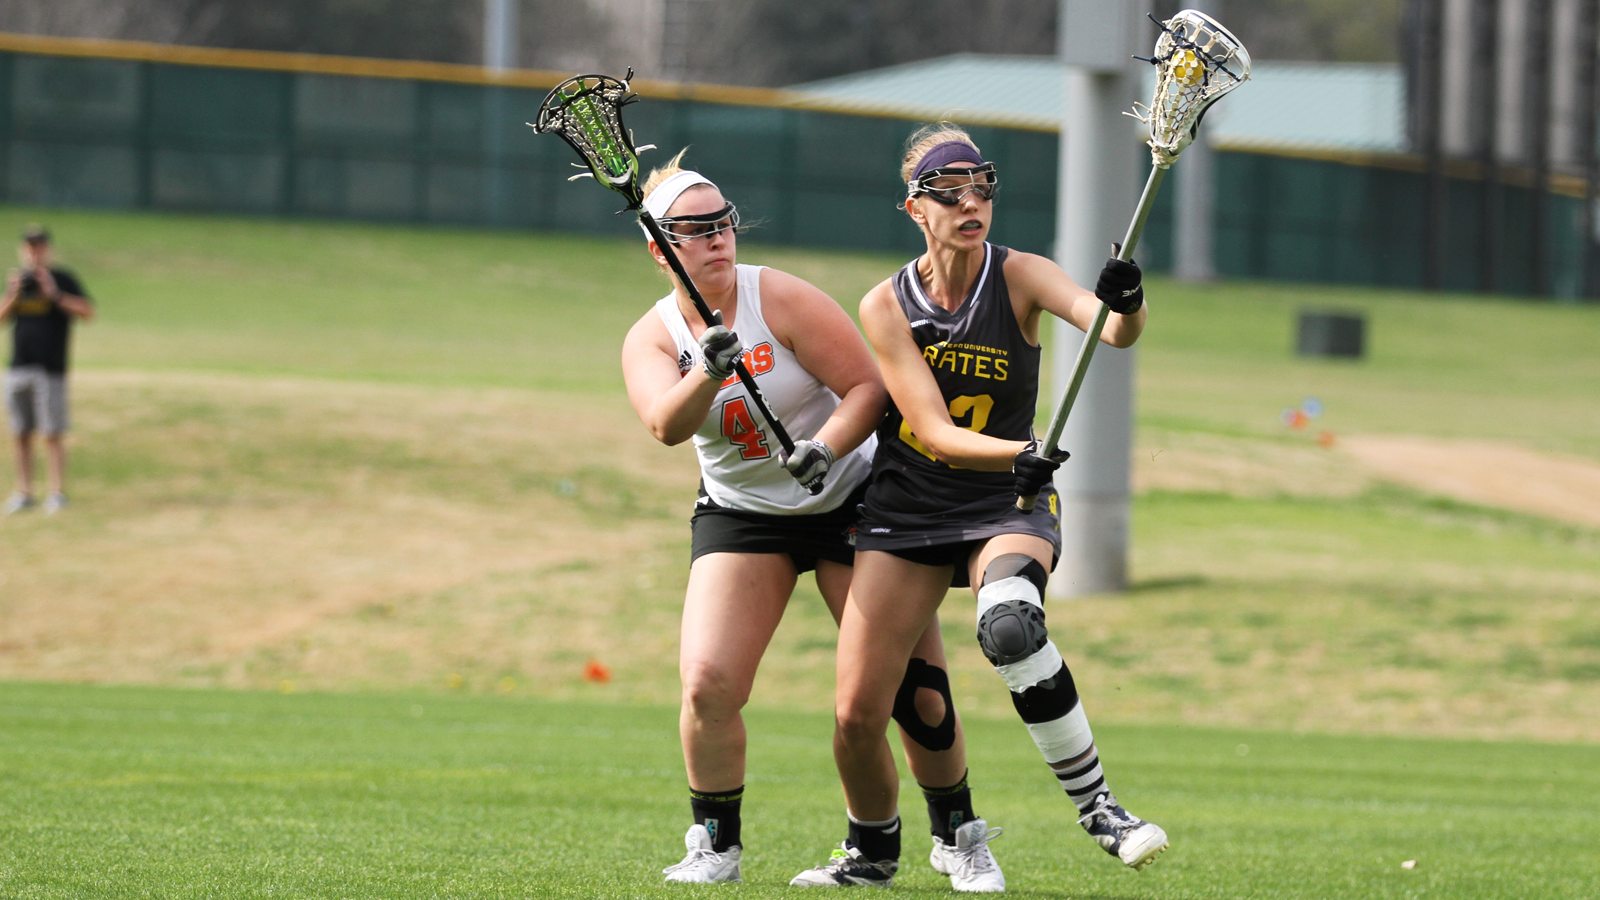 Women’s lacrosse suffers first loss, falling 15-5 to Occidental